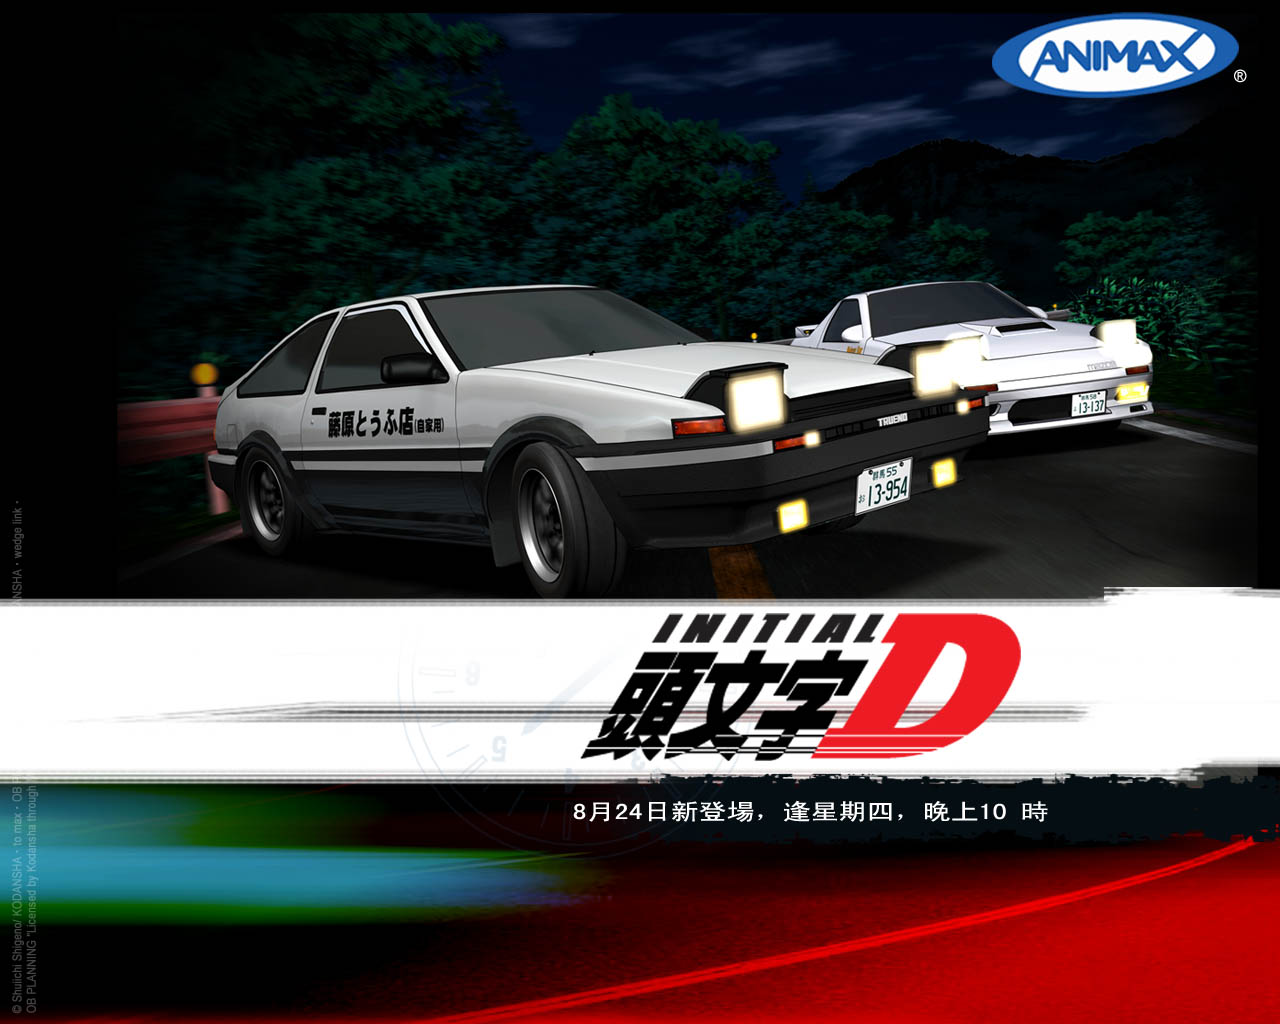 Free Download Pics Photos Wallpaper Initial D Image Initial D 1280x1024 For Your Desktop Mobile Tablet Explore 73 Wallpaper Initial D Initial D Wallpaper Hd Initial Wallpaper For Computer